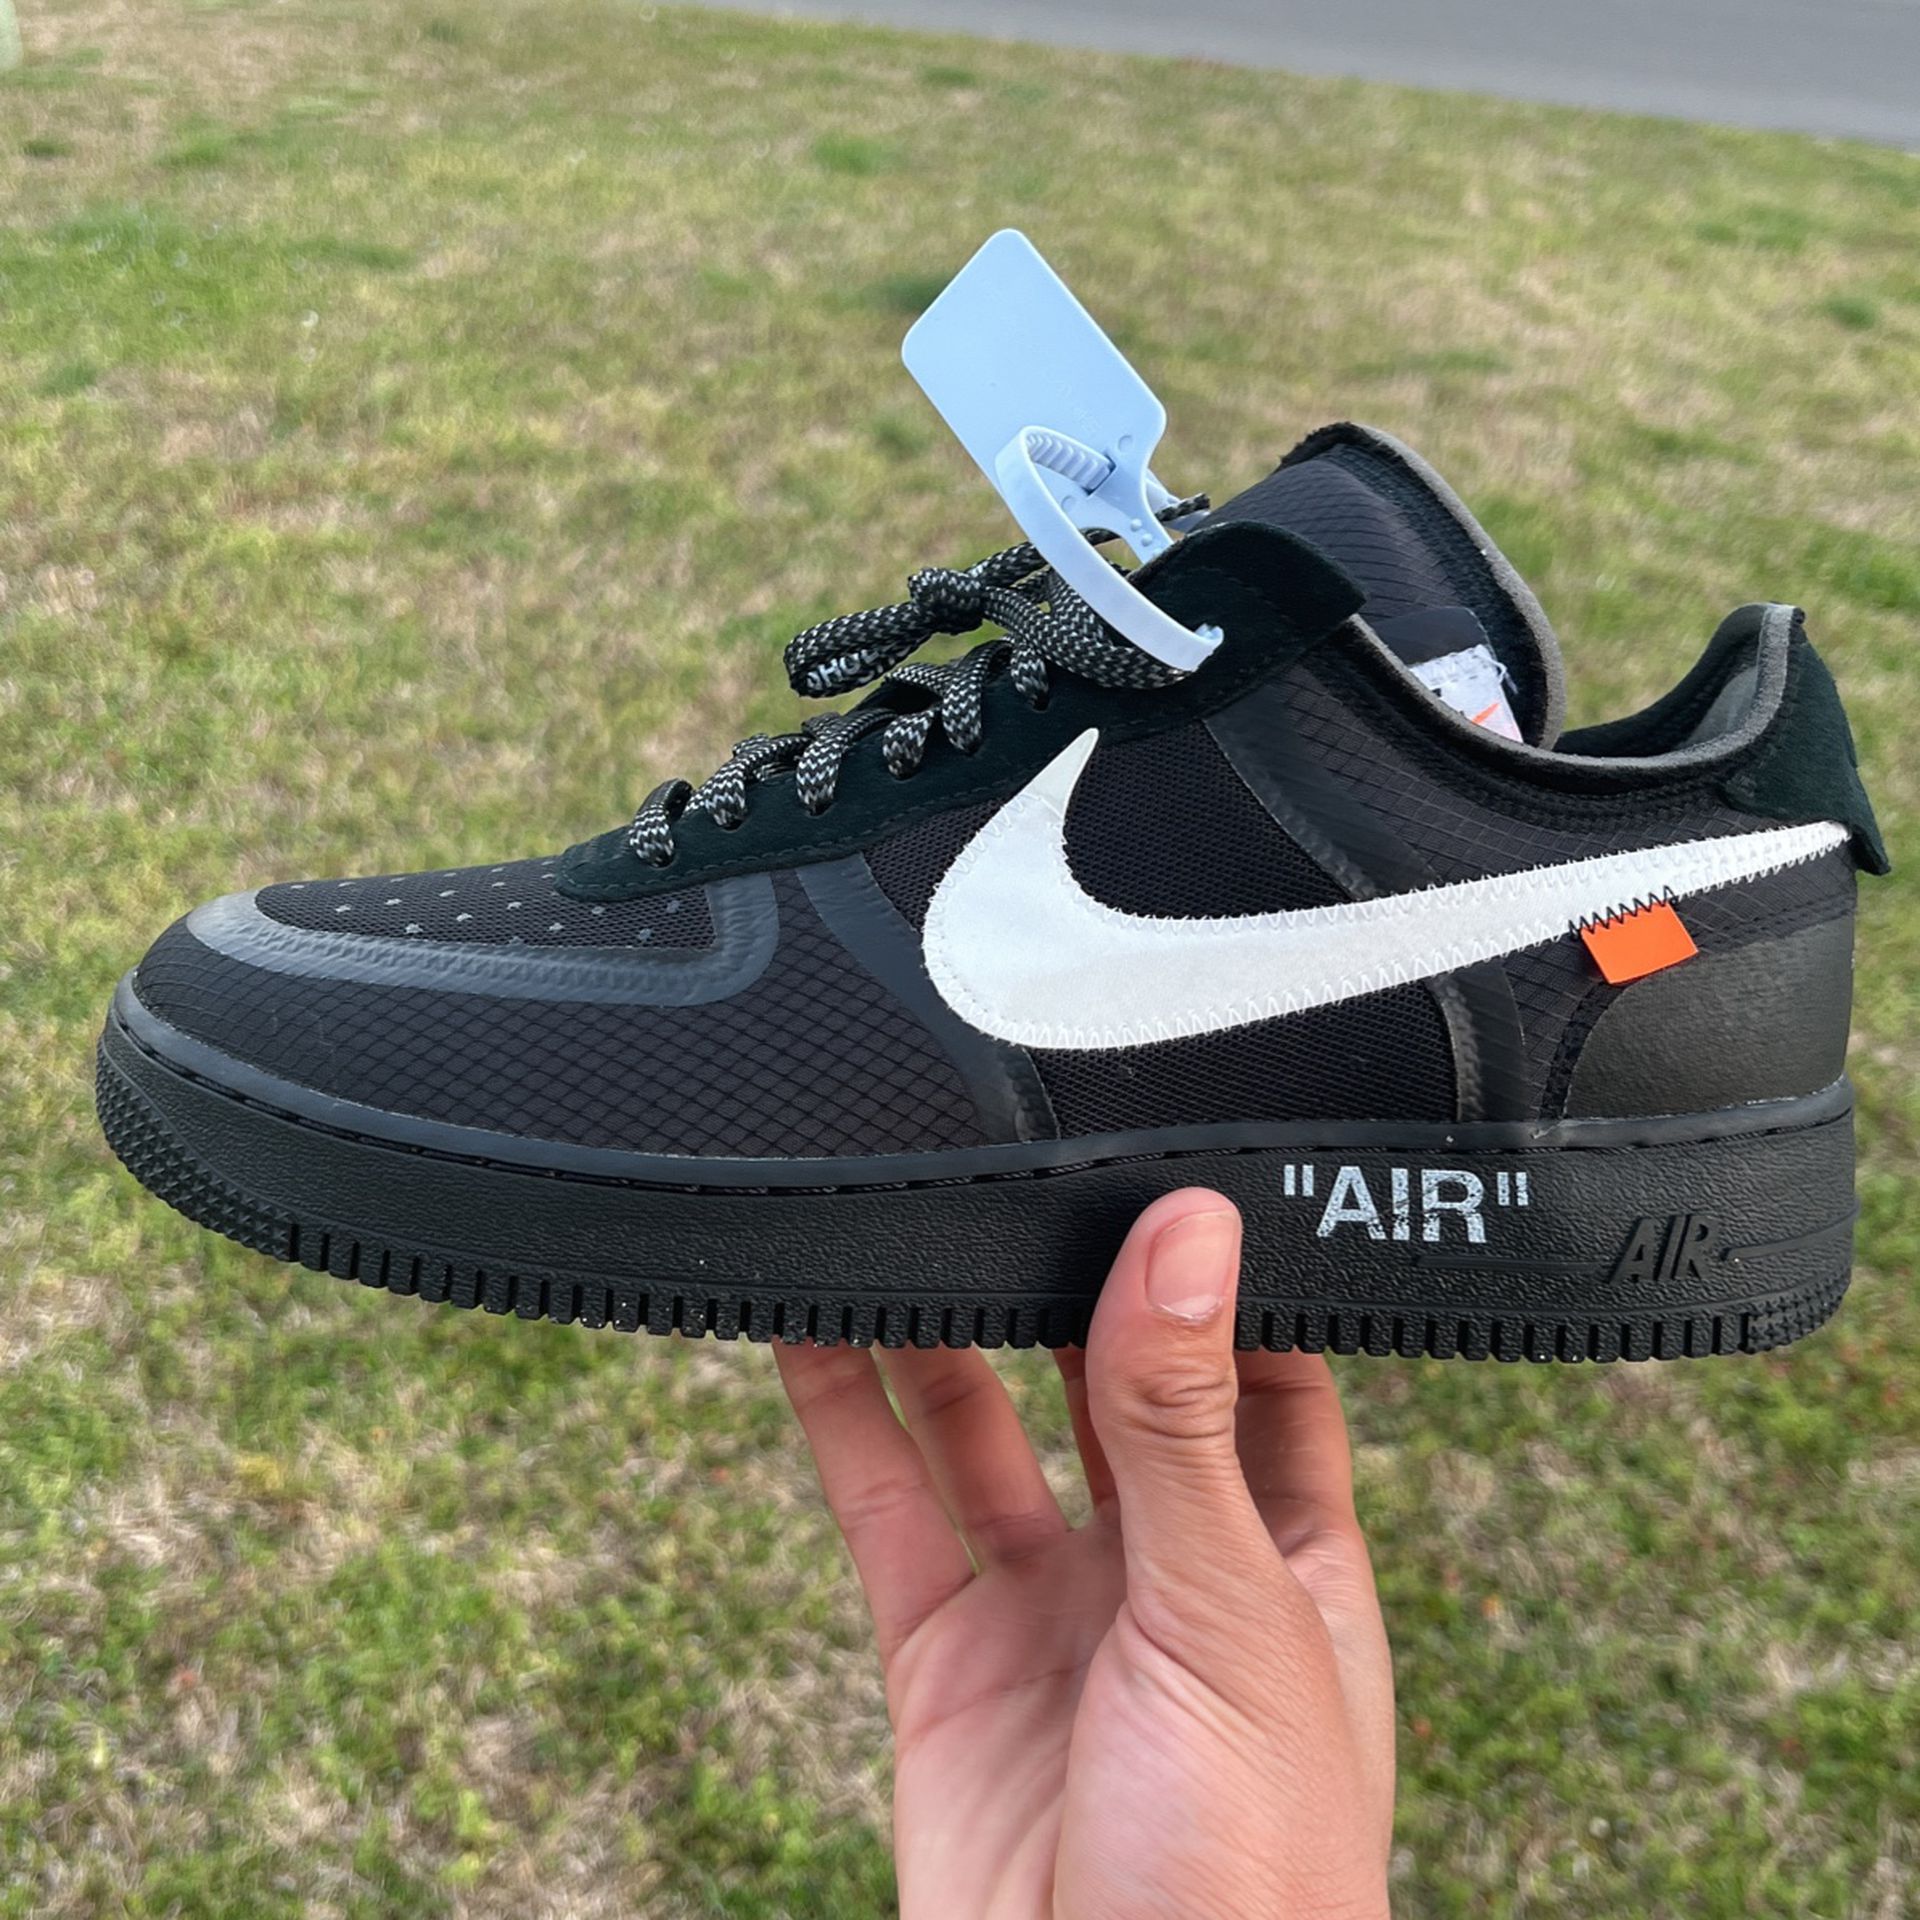 Nike x Off-White Black Air Force 1 Low